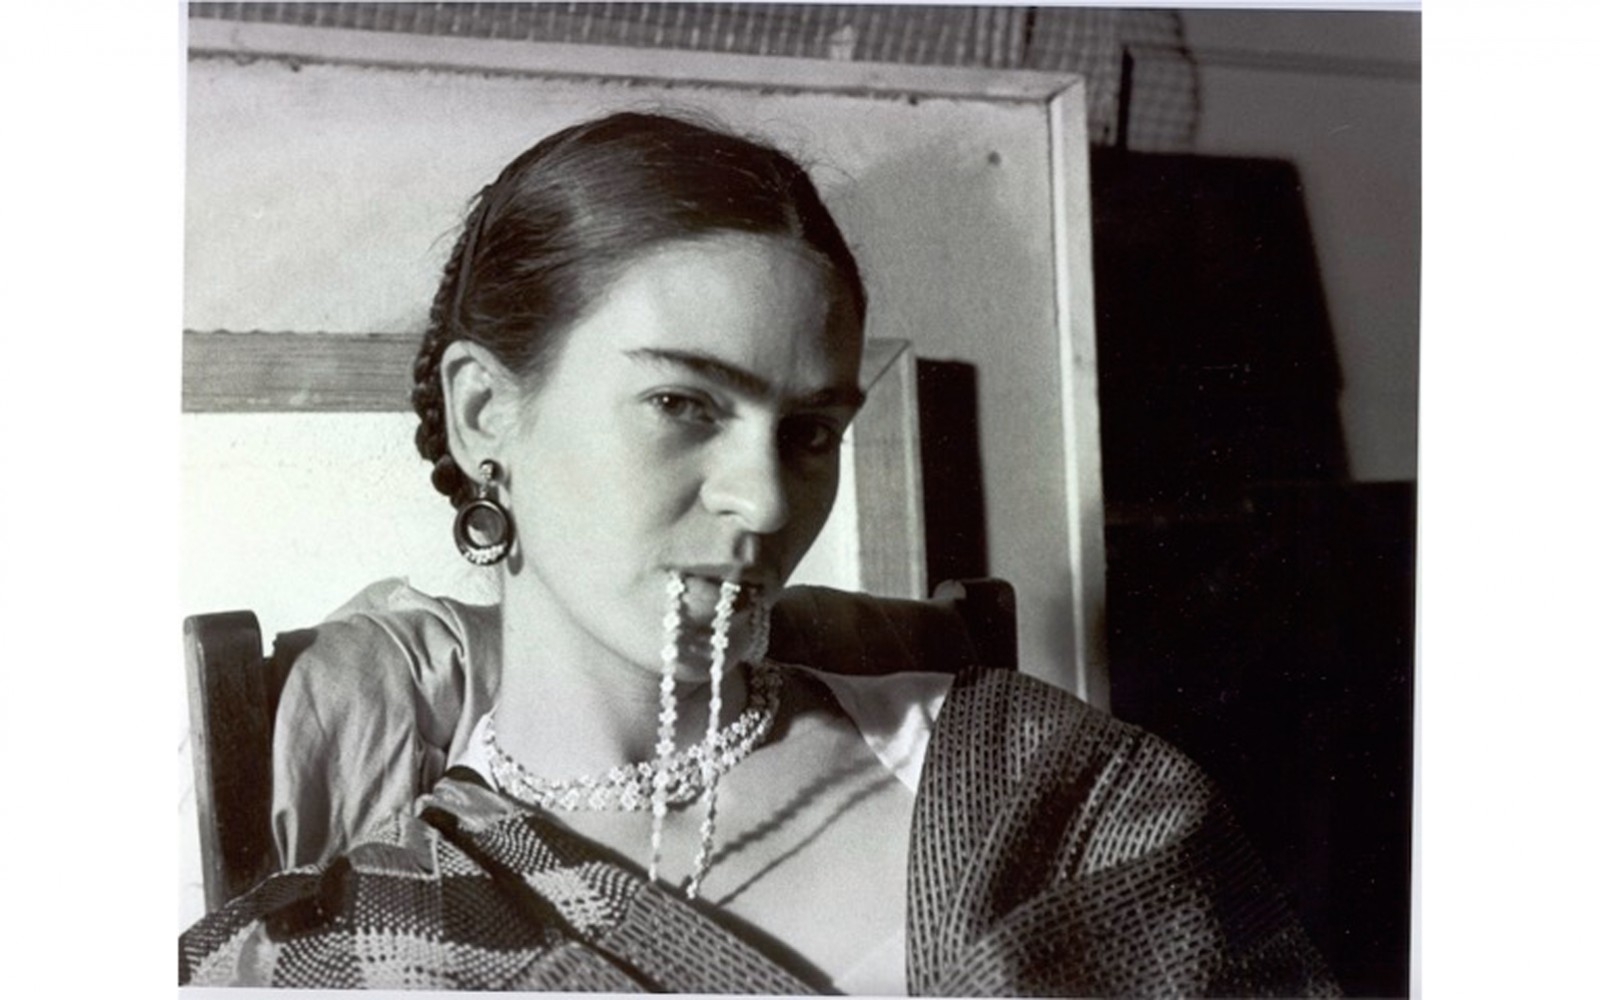 New-Workers-School-2Frida-Biting-Her-Necklace-New-Workers-School-low-res